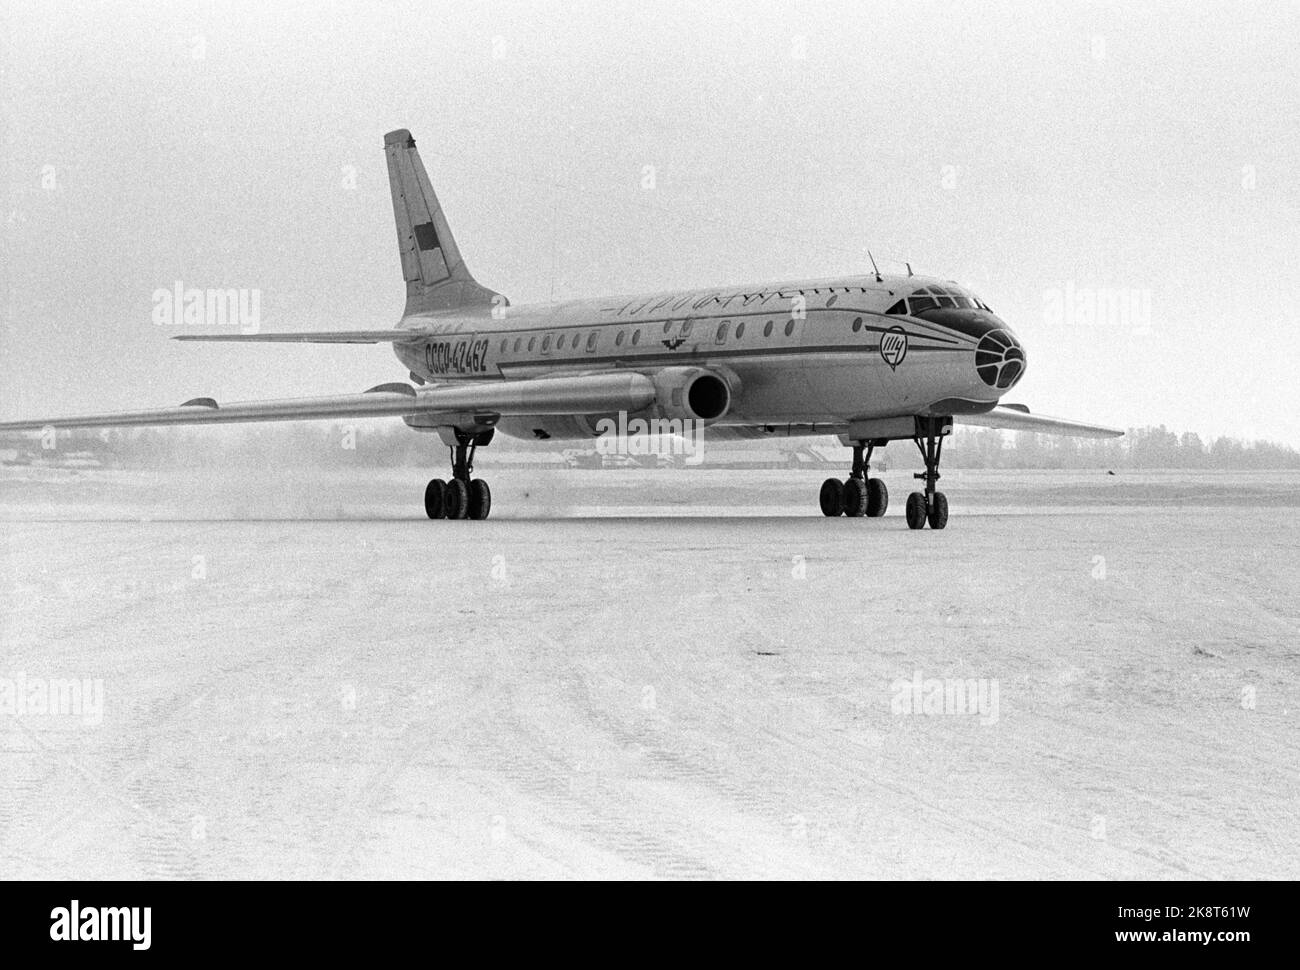 Fornebu March 9, 1963. The Soviet Foreign Minister Andrei Gromyko visits Norway with his wife. Here the Soviet aircraft that brought them to Norway. Photo: Aage Storløkken / NTB / NTB Stock Photo